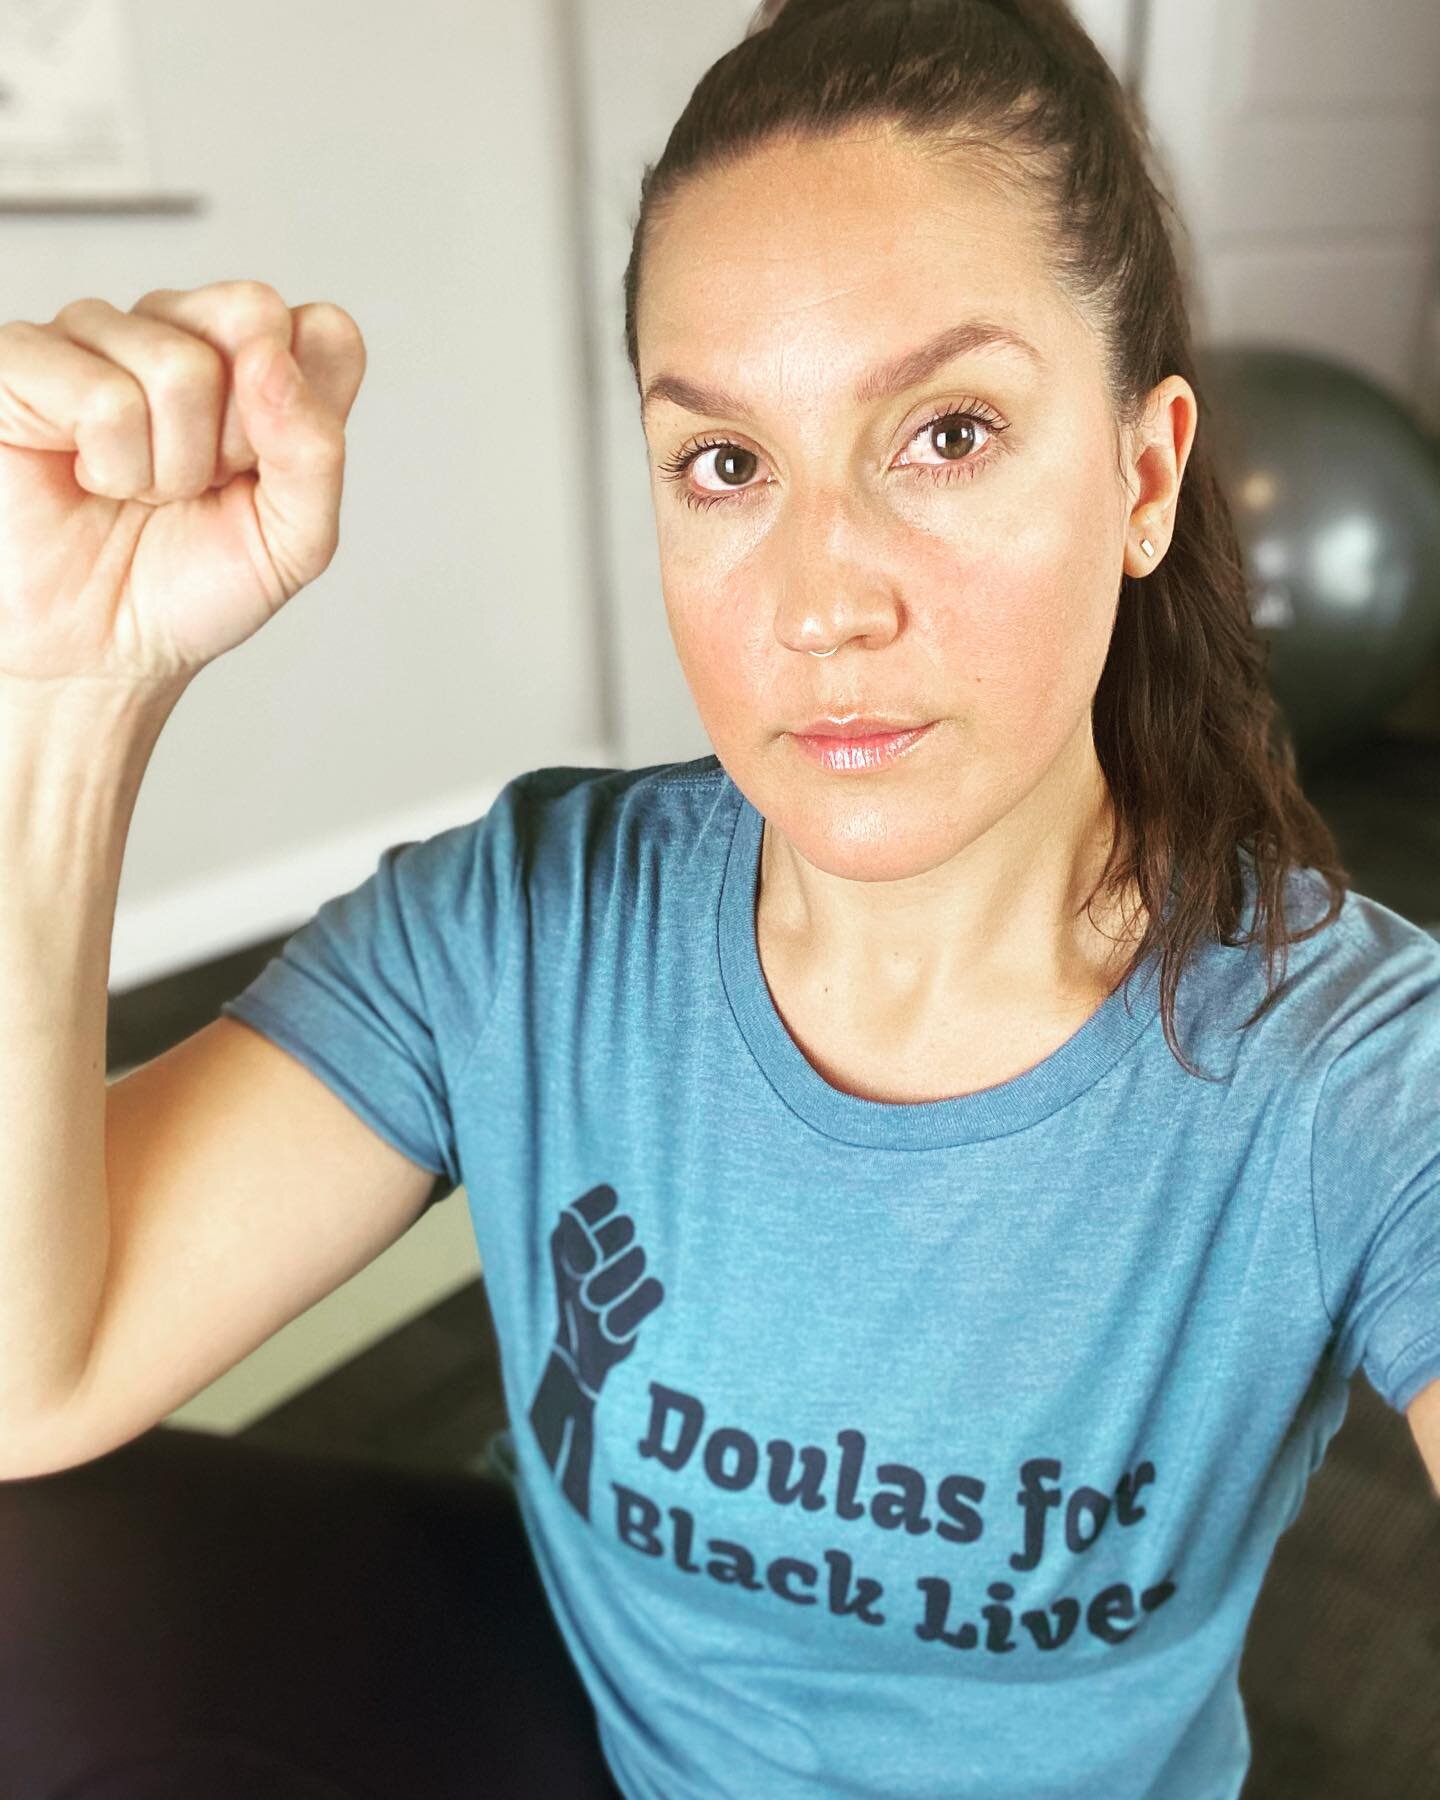 To birth a just and bright future, we must fund and invest in BIPOC-led community Birth centers at scale.
Learn about the value of Birth centers during a pandemic @birthingplacebx 
#doulasforblacklives 
Shirt by @jamiimidwife 🔥